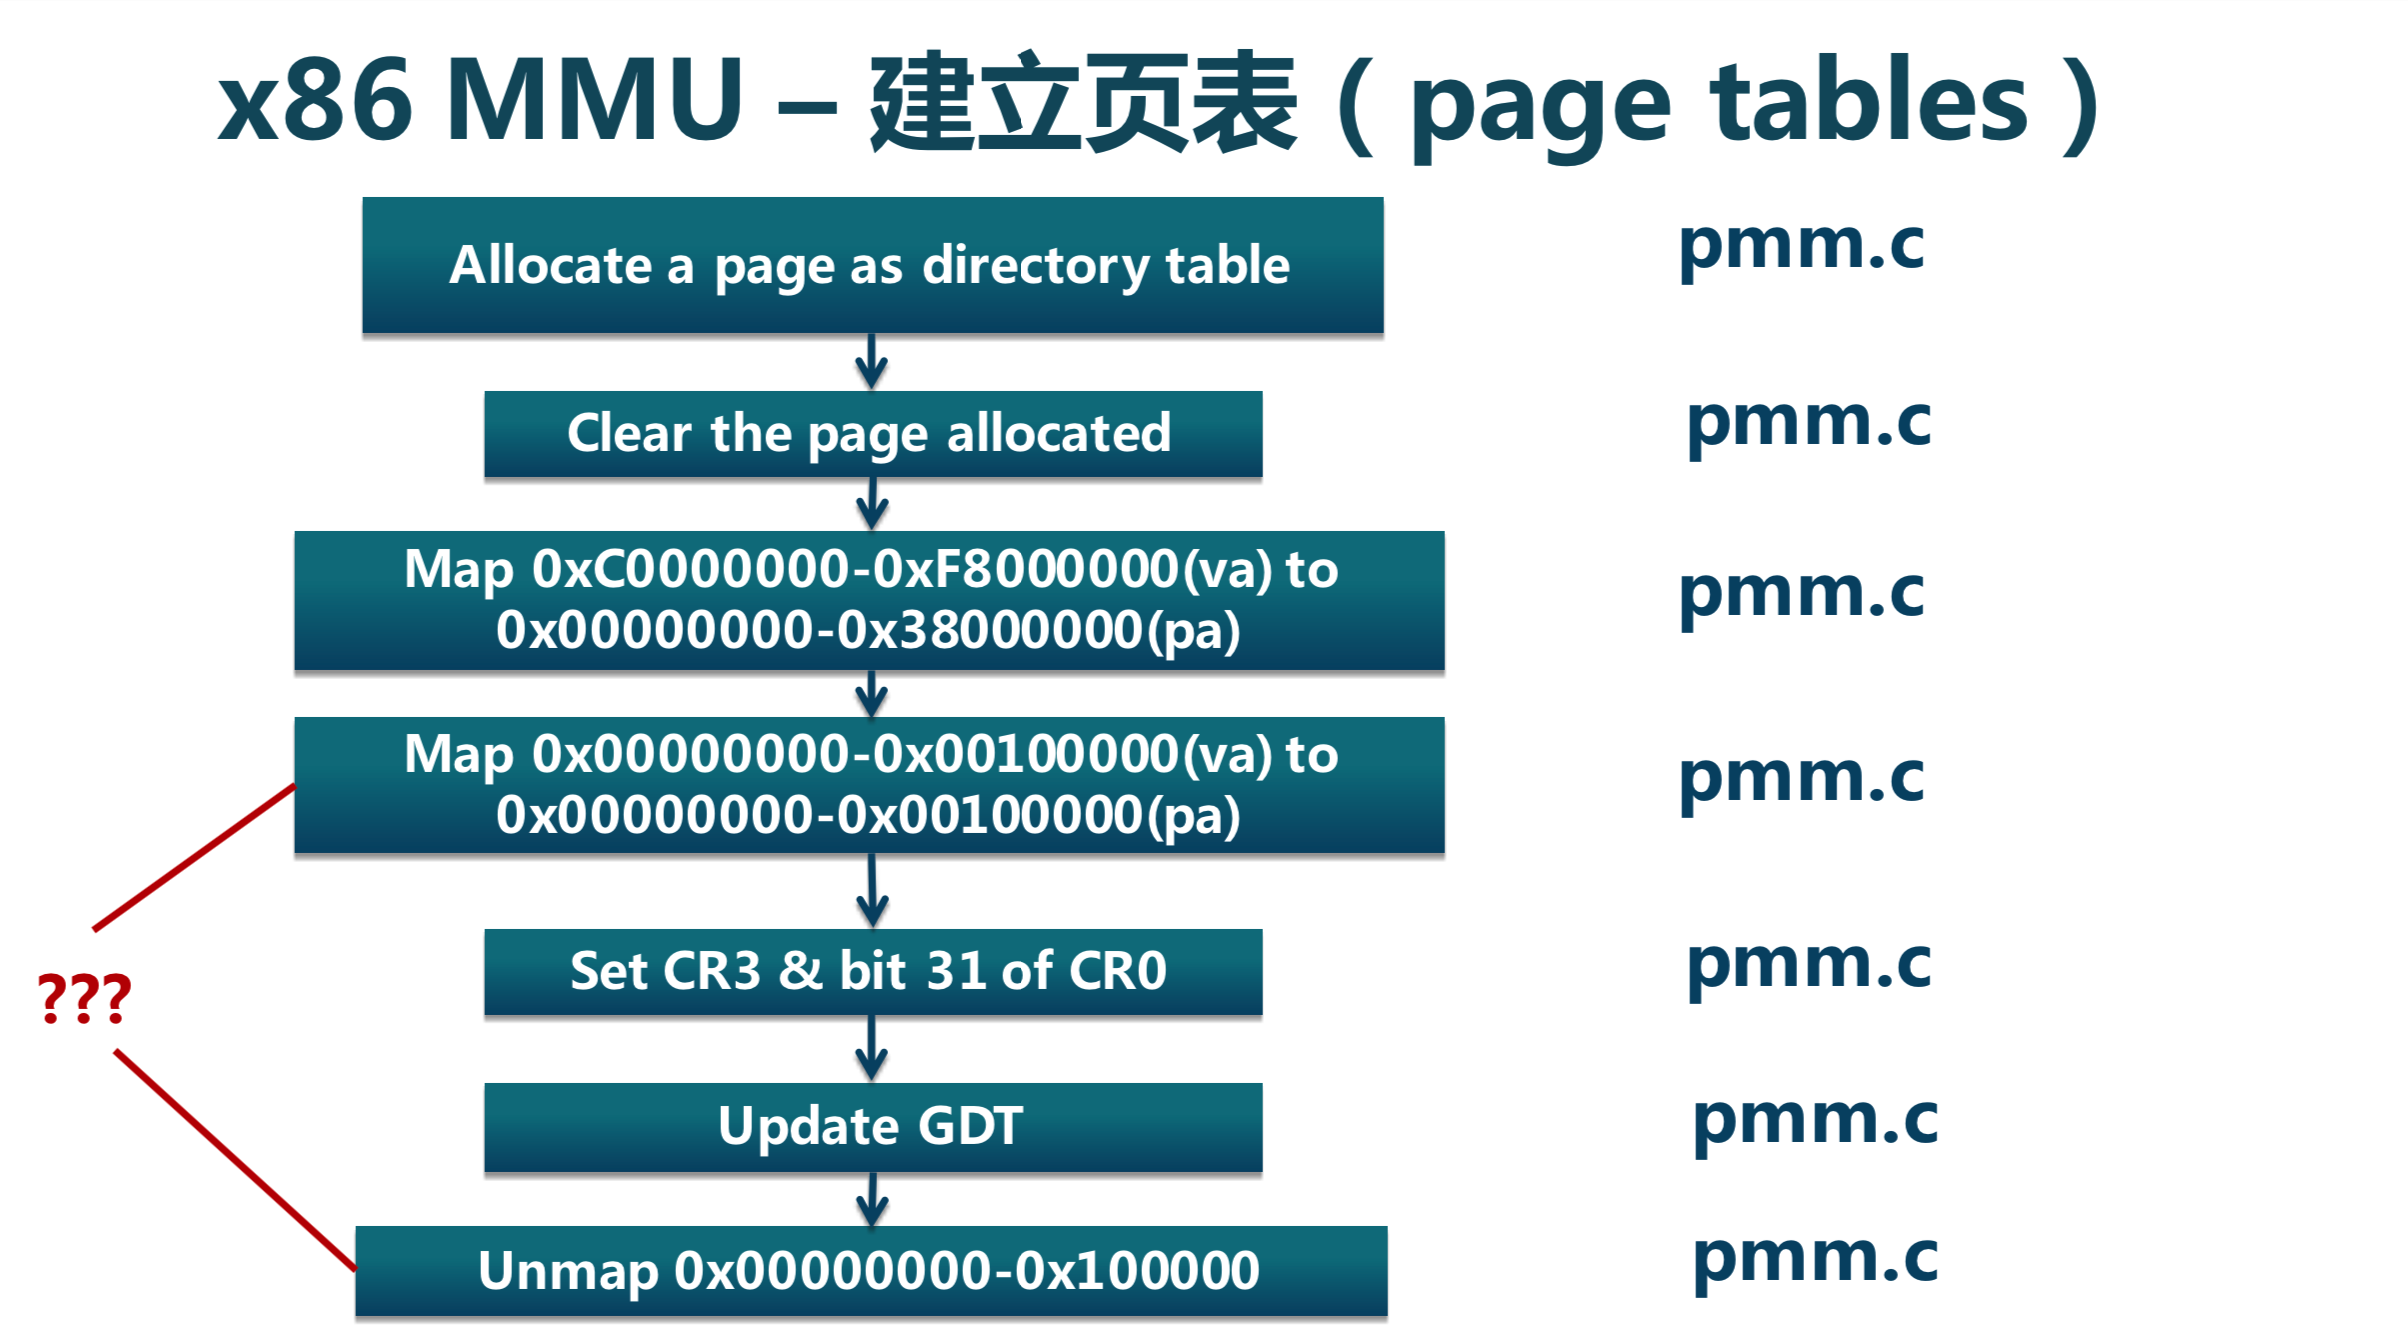 mmu-page-tables